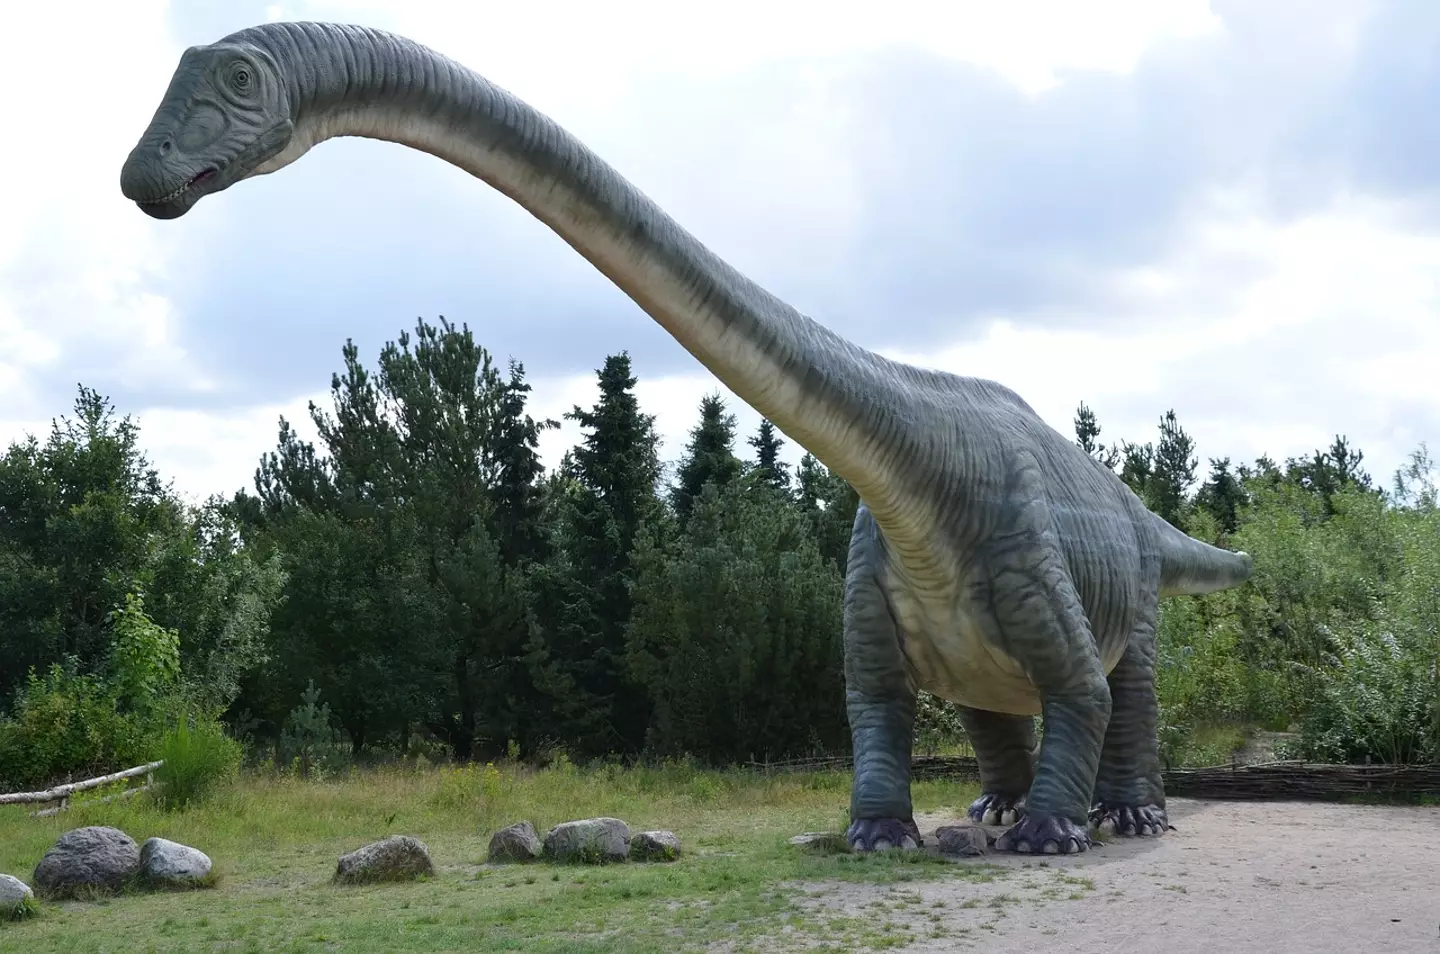 A gorgosaur will eat massive herbivores when they reach adulthood.